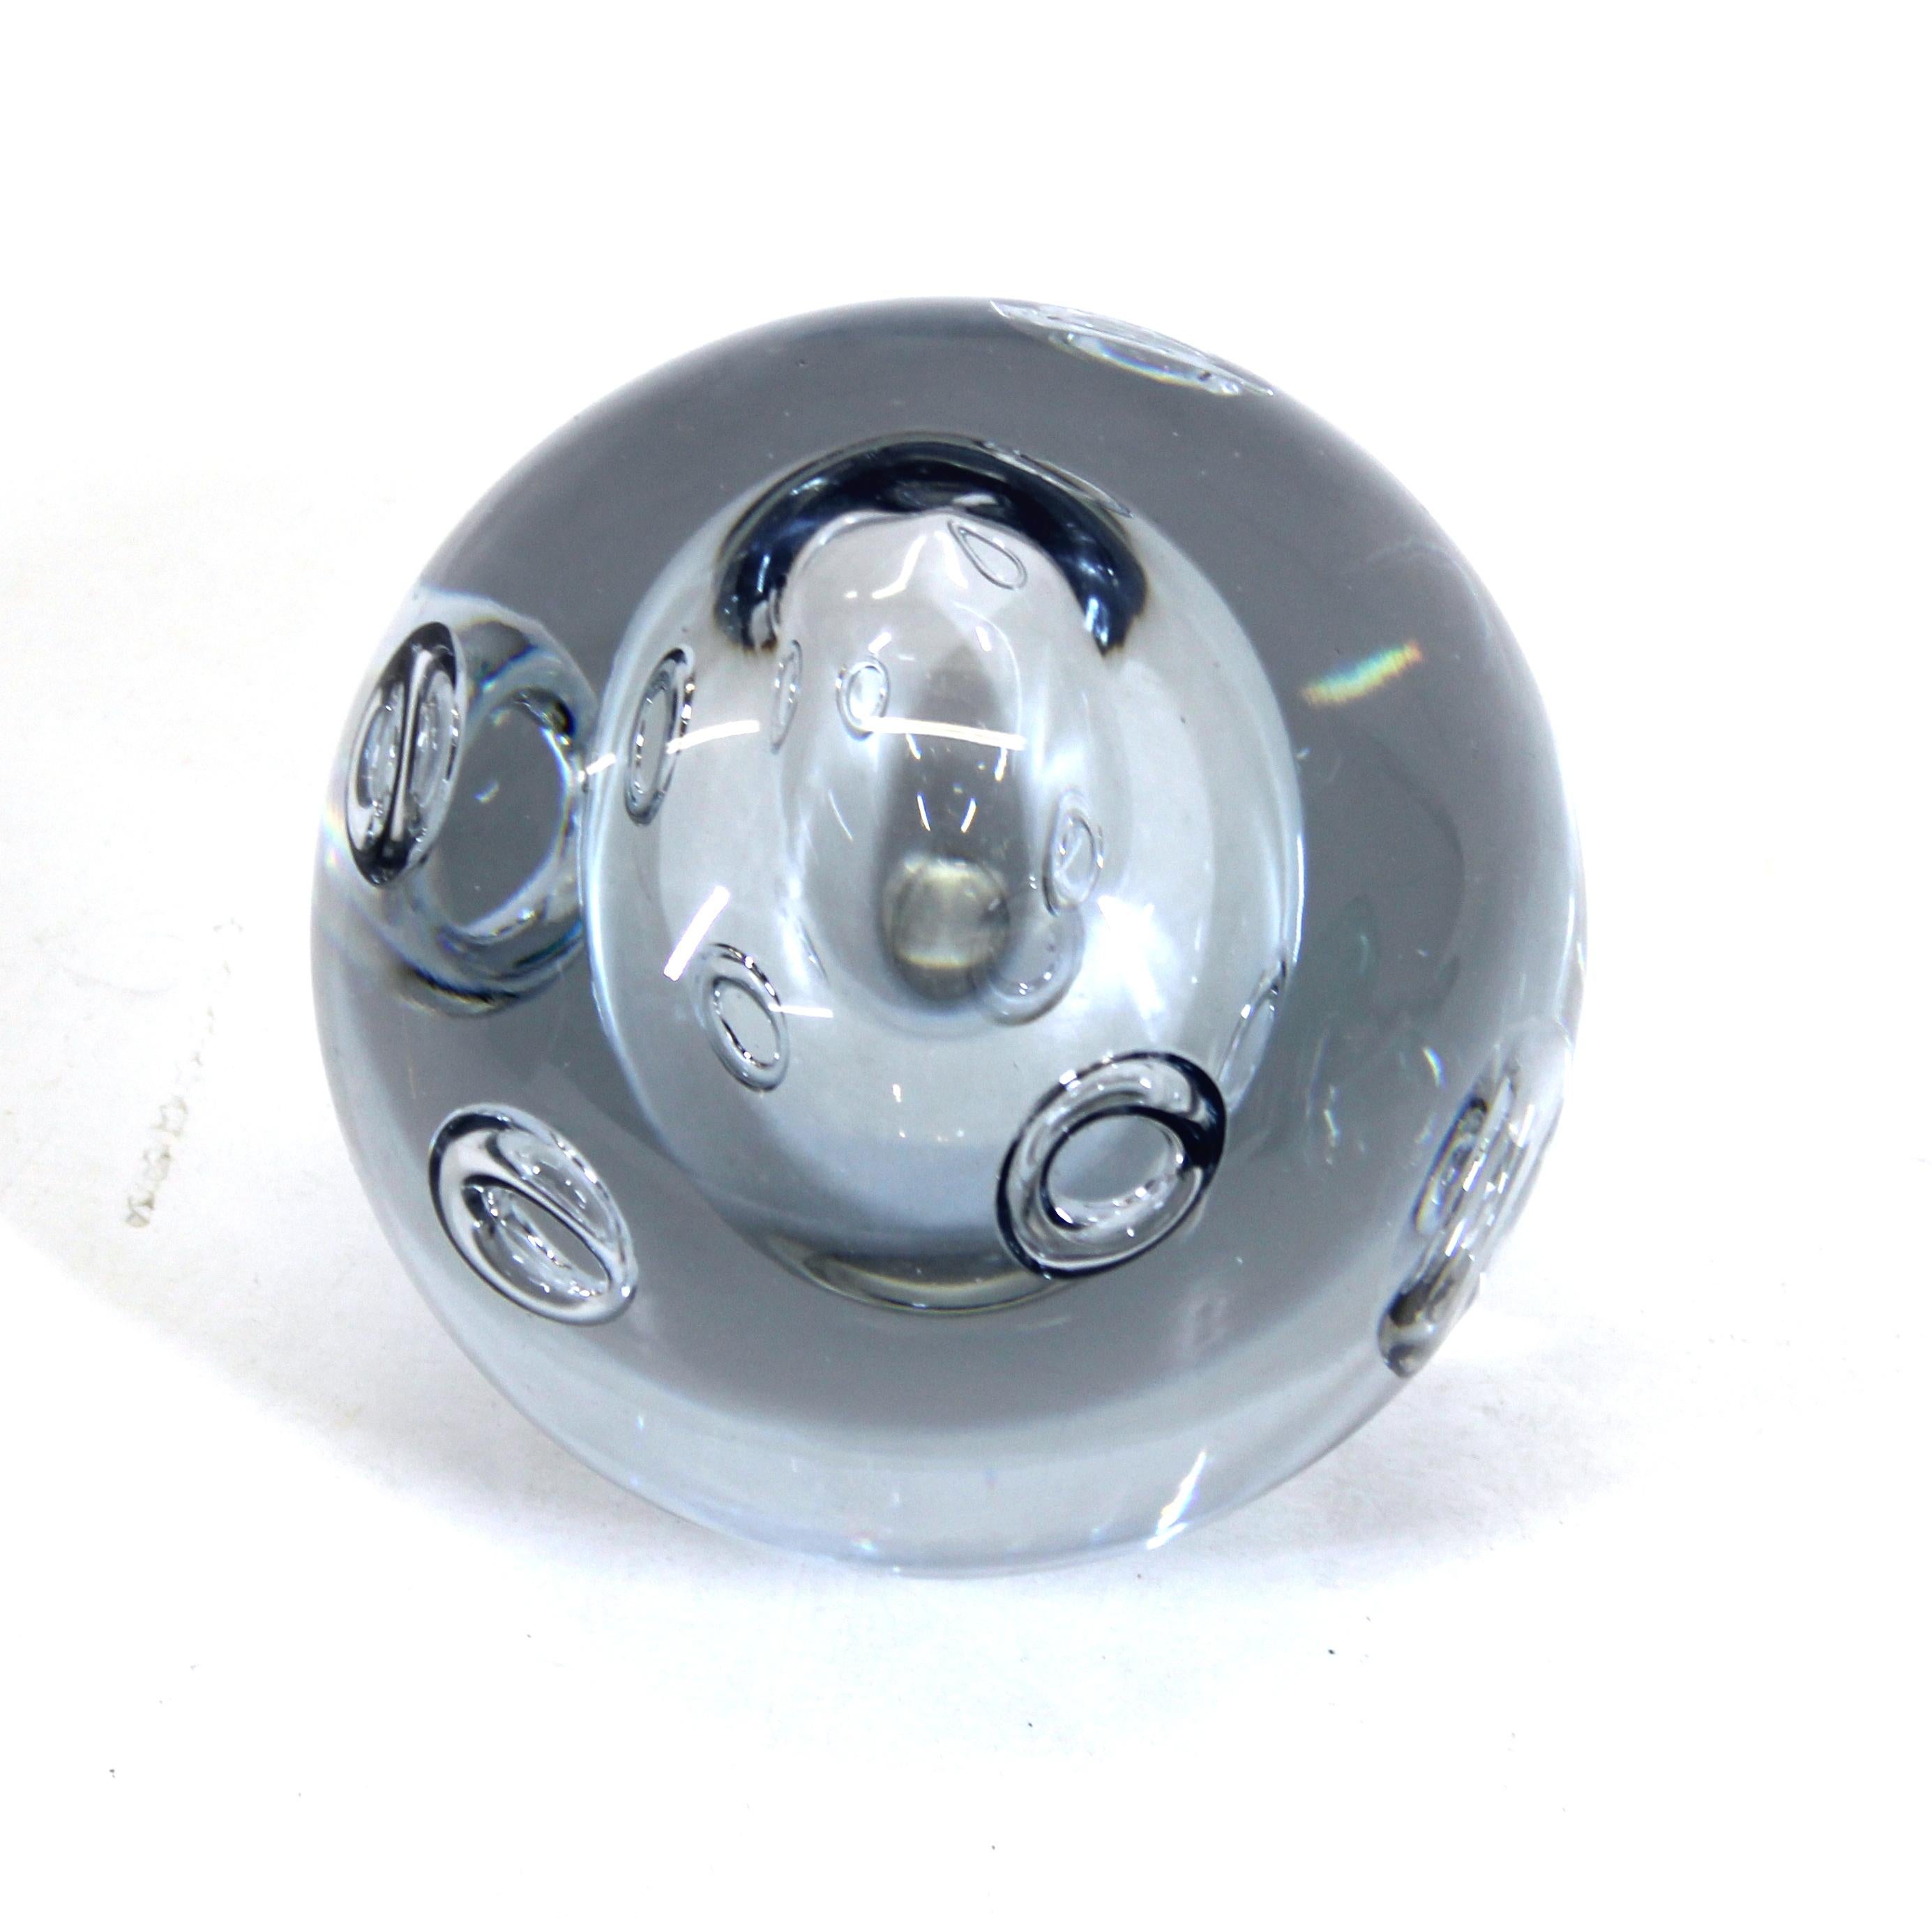 Modern art glass paperweight sphere with controlled bubble rings surrounding a larger central bubble, signed illegibly on bottom.